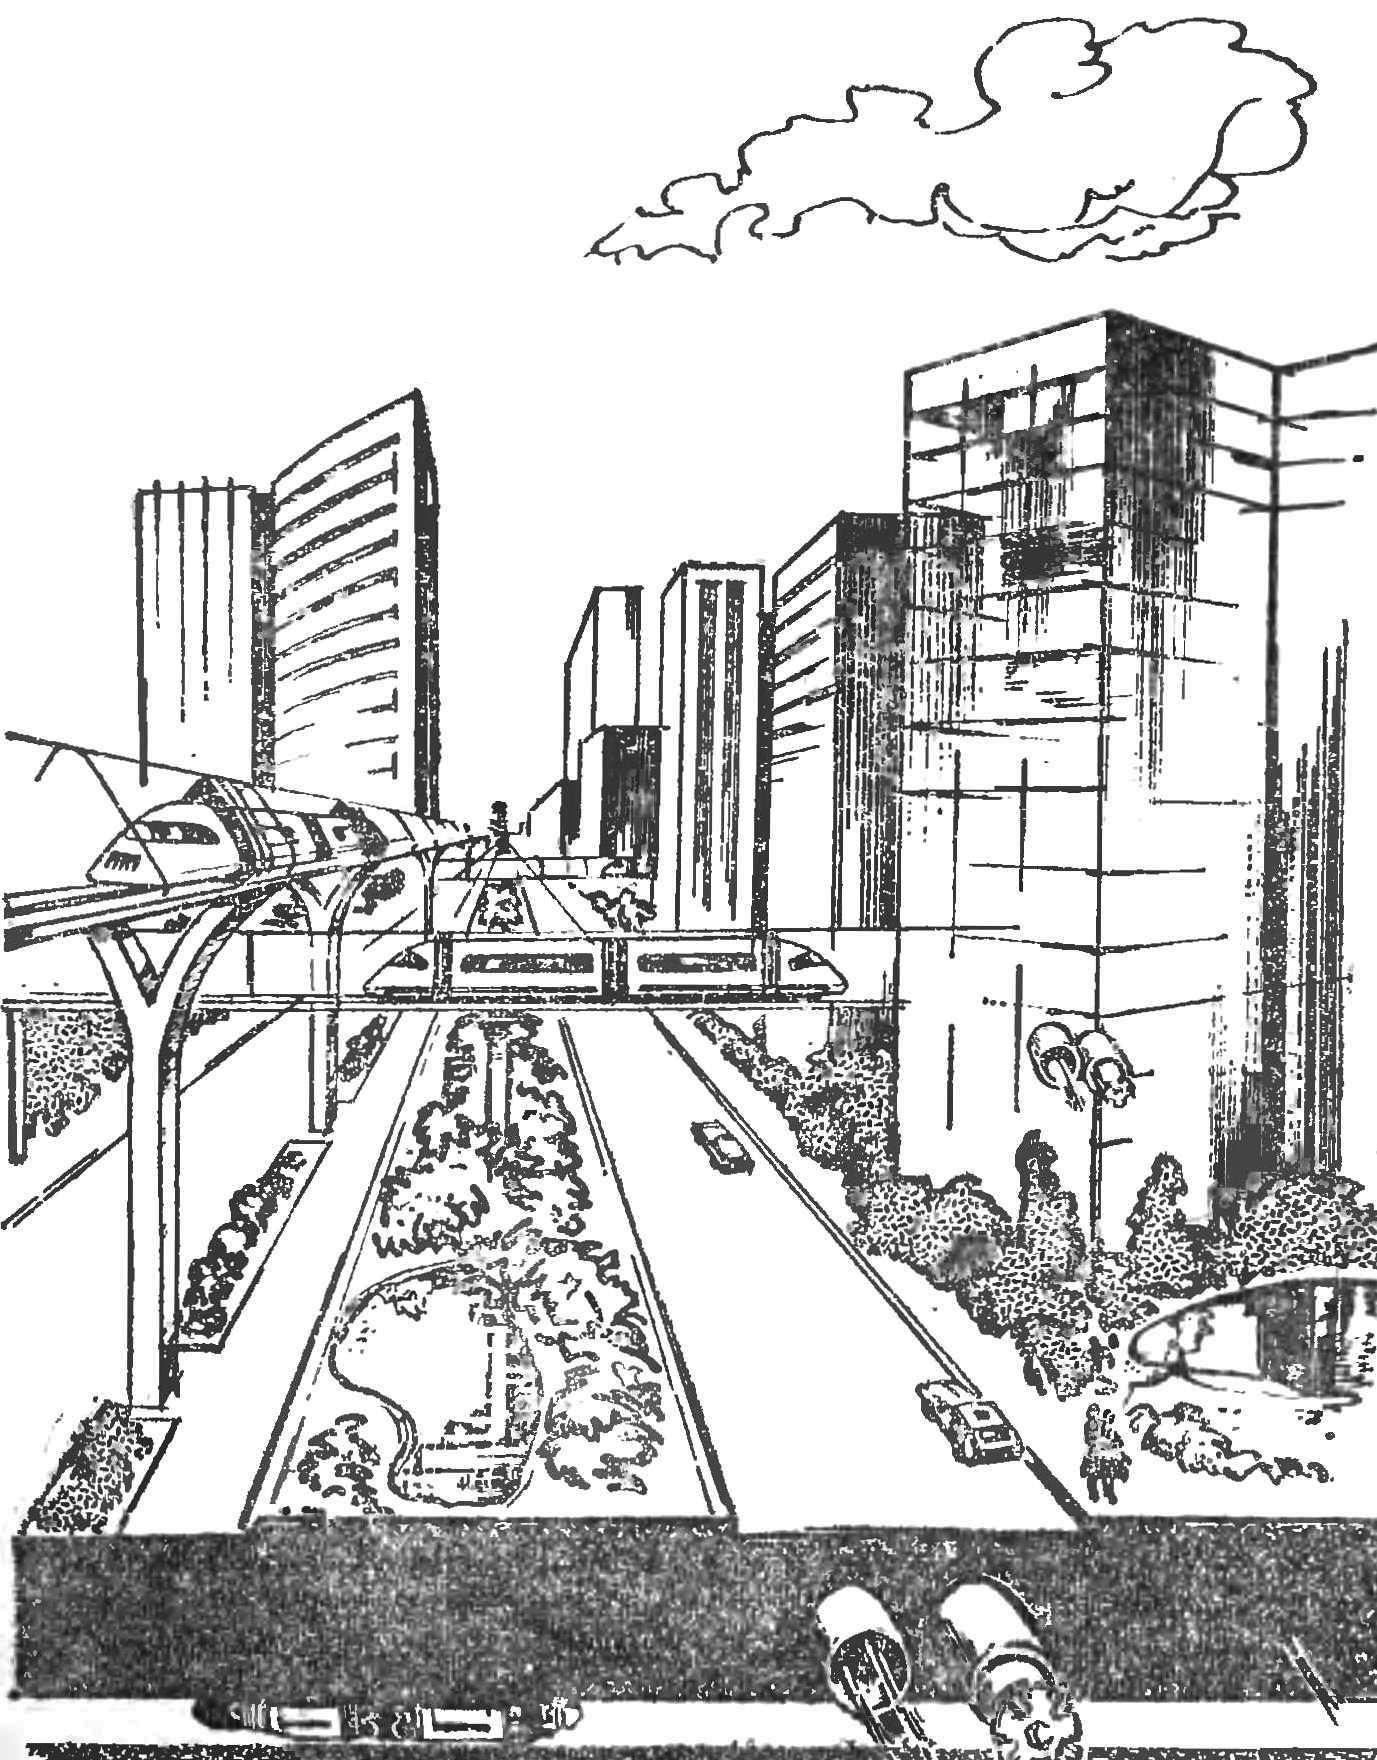 Fig. 3. It will look like the passenger system of pneumatic transport in a large modern city.